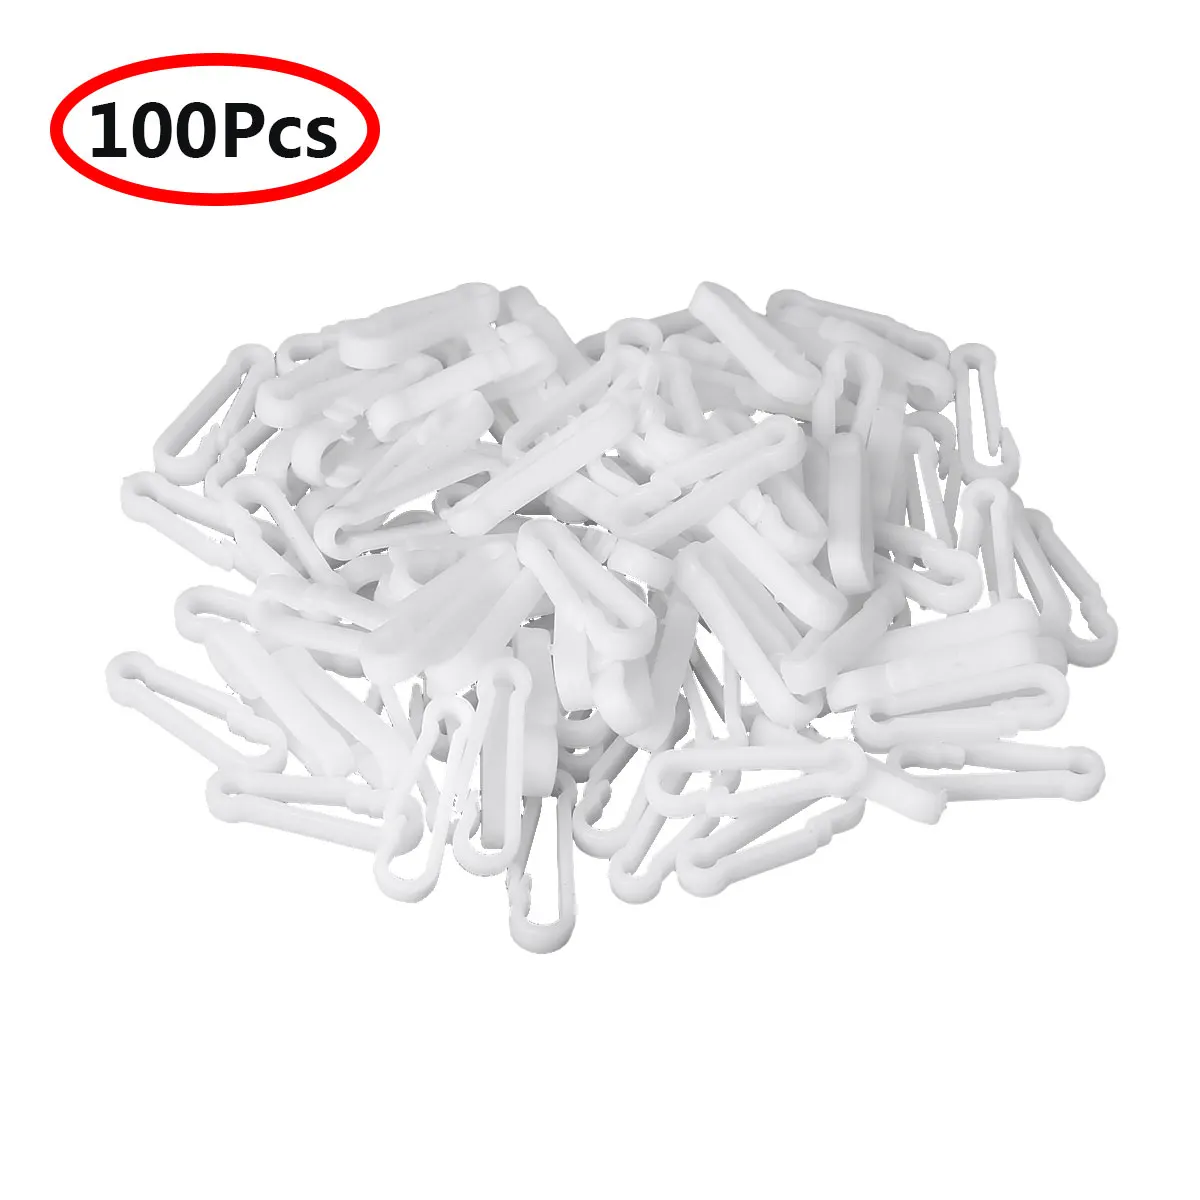 100Pc Plastic Clip Hooks Mini Carabiner Buckle Clasp For Paracord Backpack Strap 